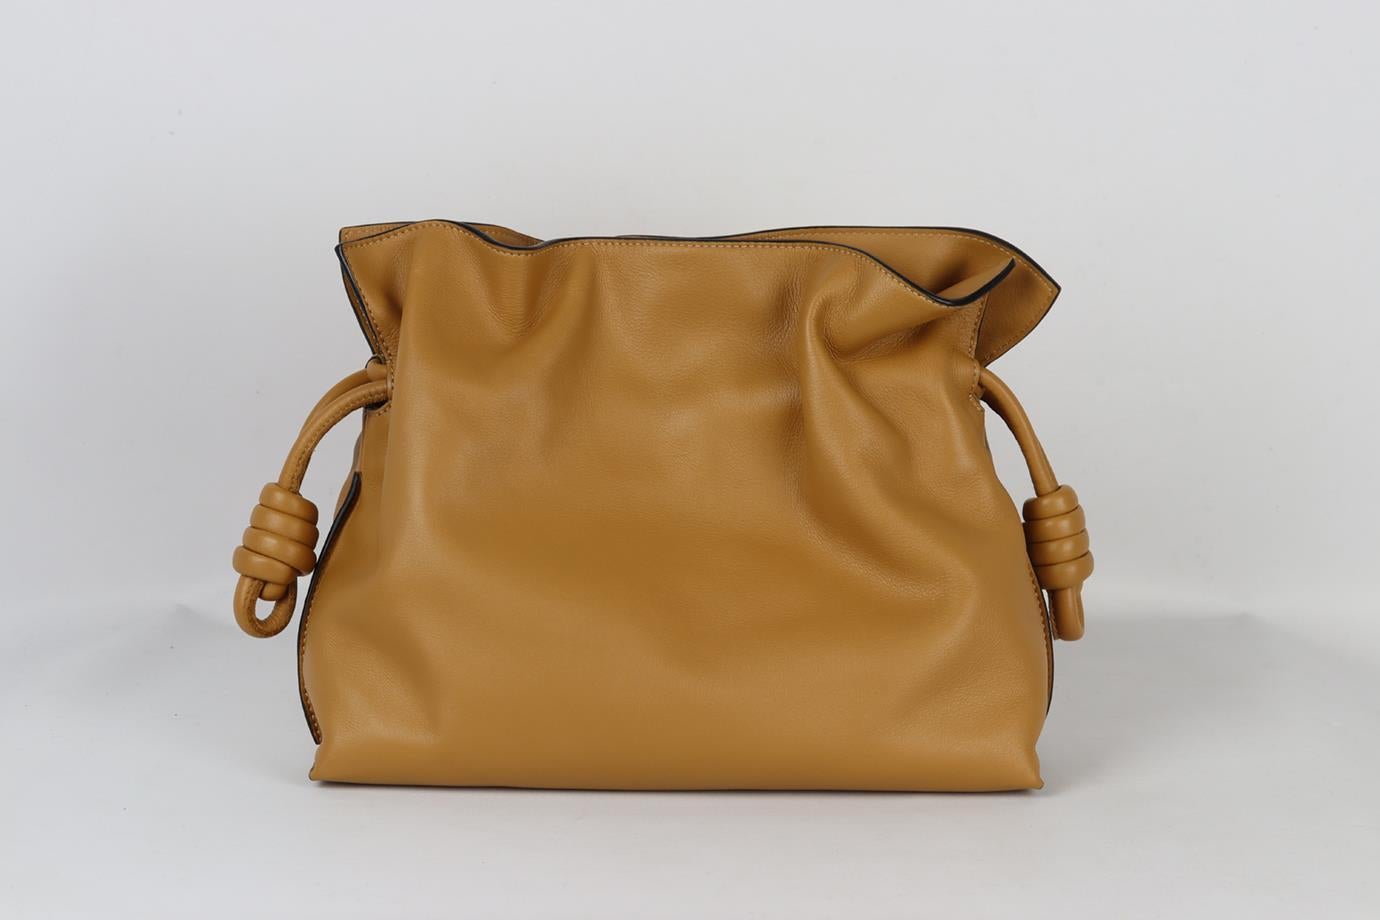 Loewe Flamenco leather clutch. Tan. Magnetic fastening at top. Comes with dustbag. Height: 8.5 in. Width: 11.6 in. Depth: 3.6 in. Min. Strap Drop: 19.5 in. Max Strap Drop: 21.6 in. Very good condition - Barely worn. Light mark to base; see pictures.
